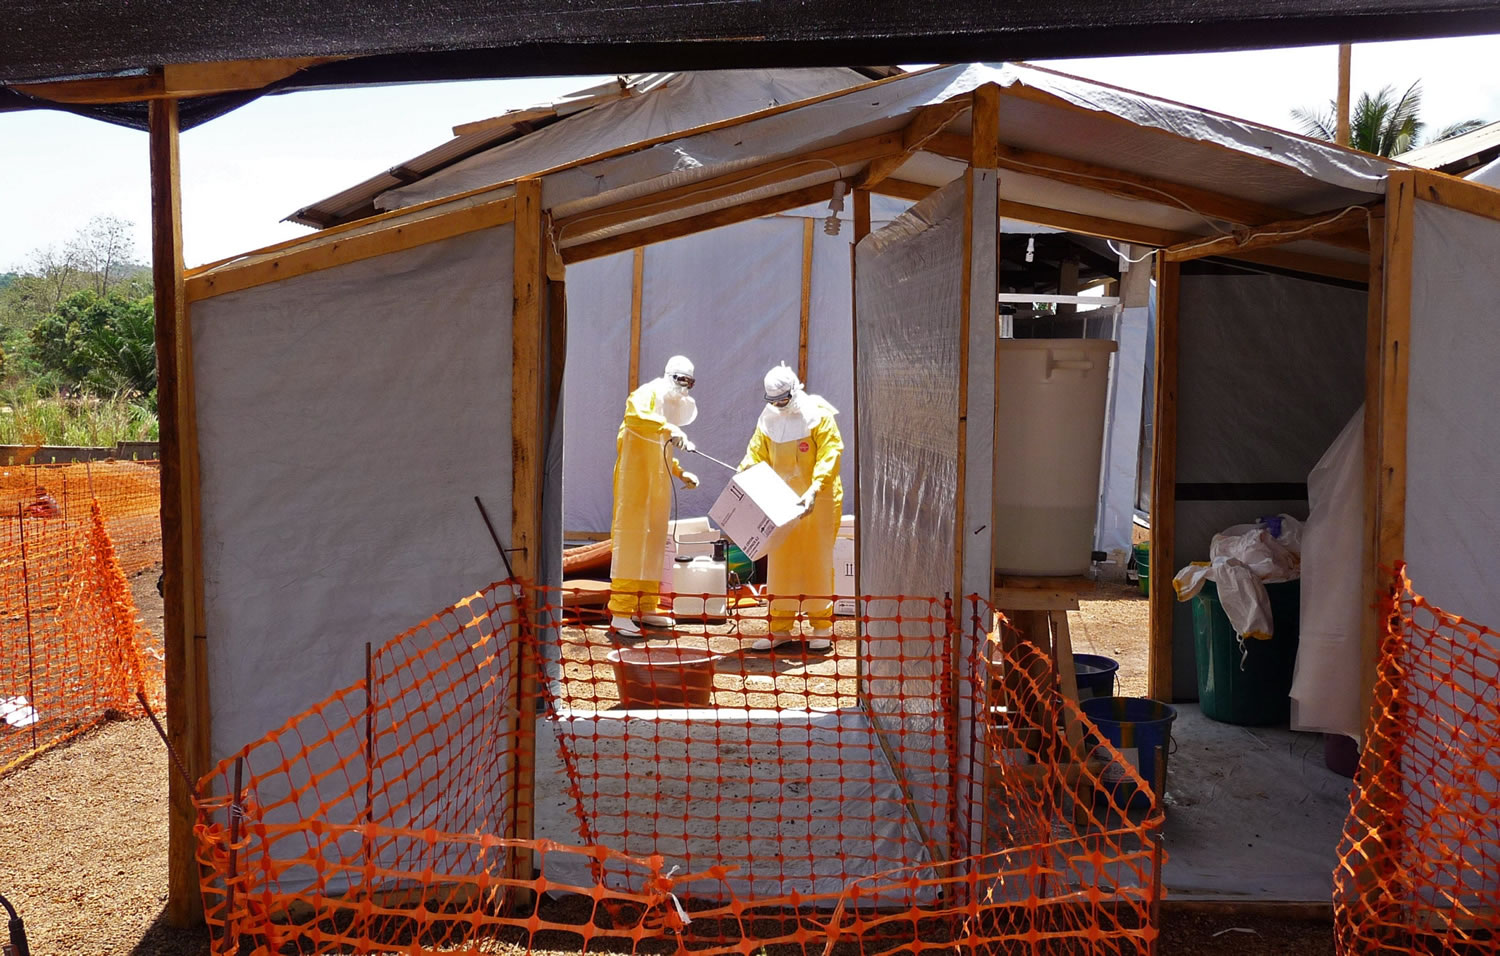 Healthcare workers prepare isolation and treatment areas for their Ebola and hemorrhagic fever operations Friday in Guekedou, Guinea.